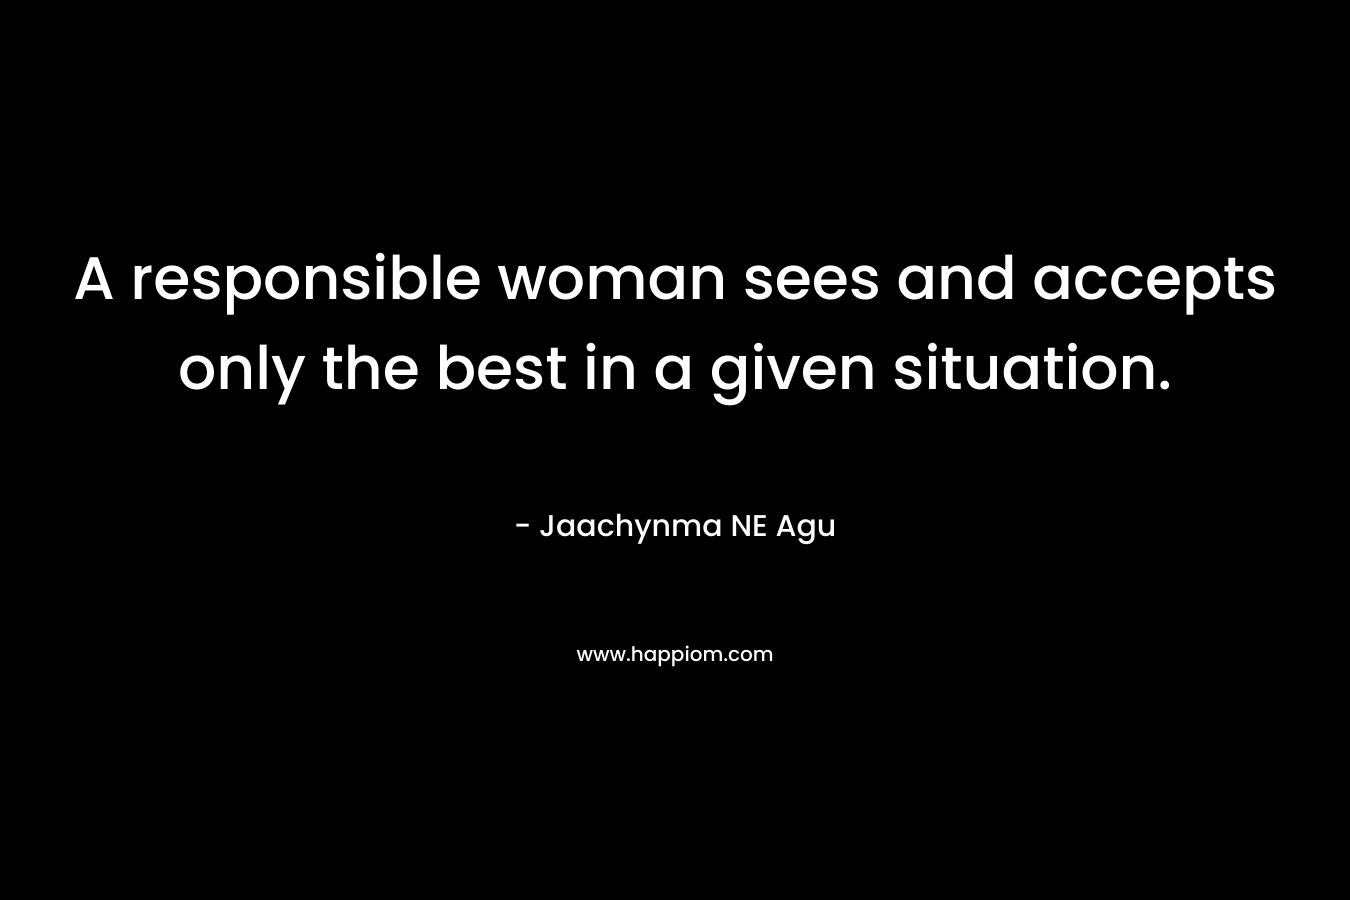 A responsible woman sees and accepts only the best in a given situation.